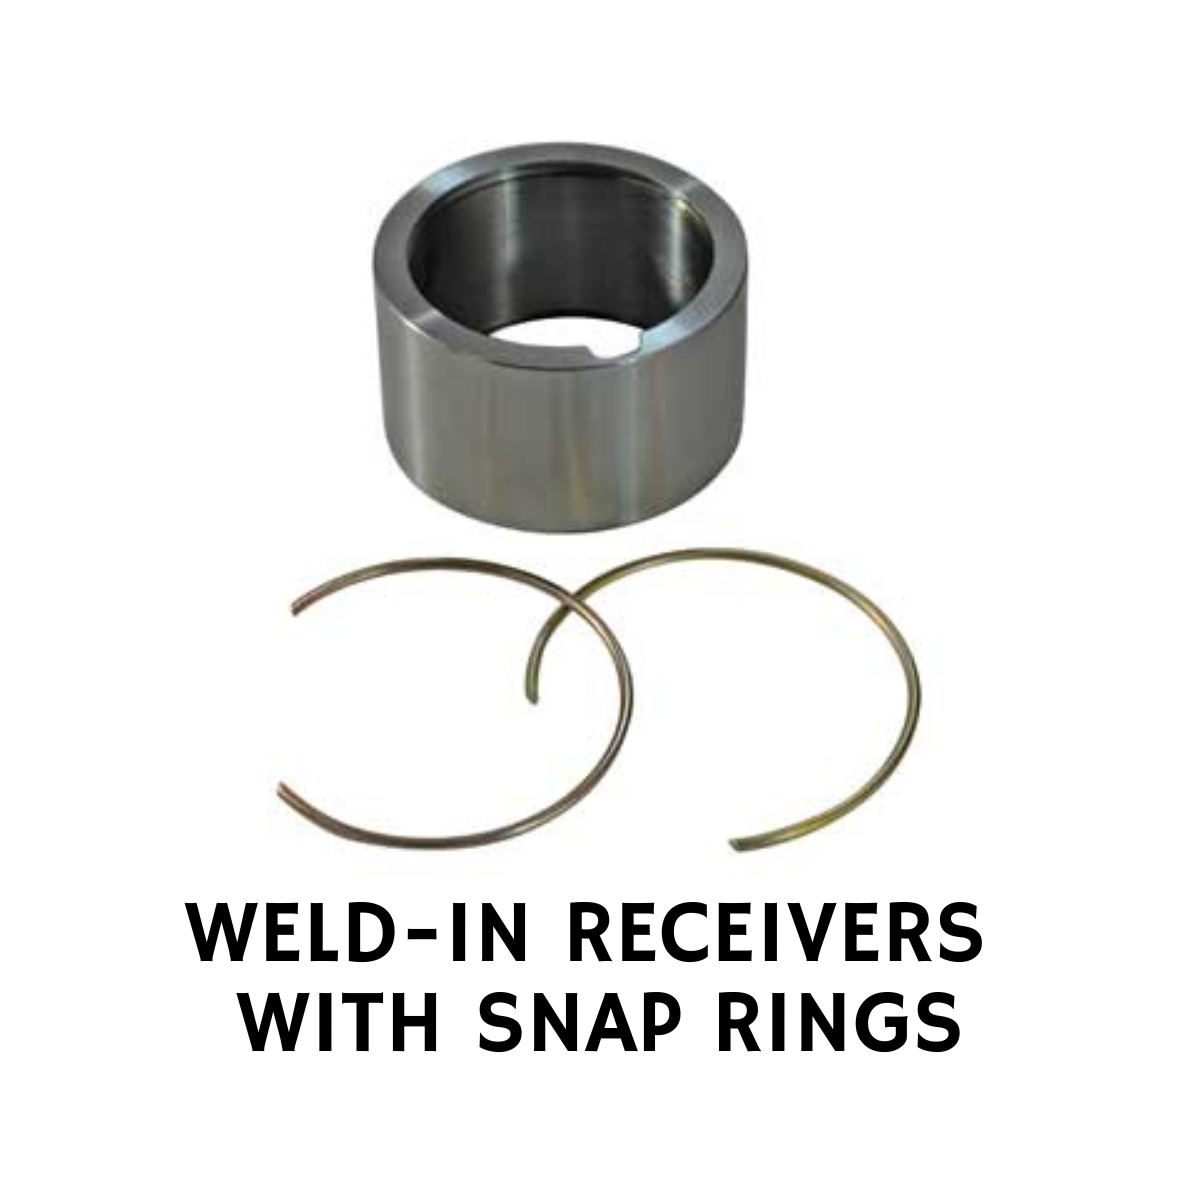 WELD-IN RECEIVERS WITH 2 SNAP RINGS